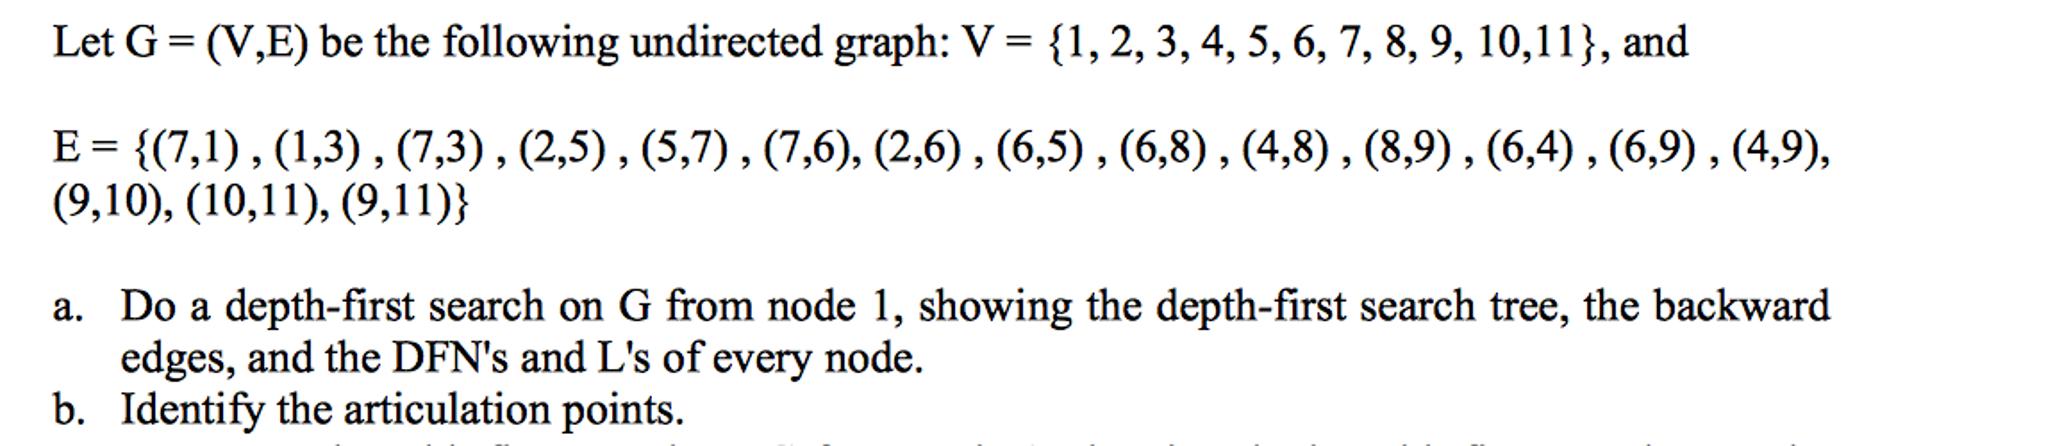 Let G=(V,E) be the following undirected graph: V = {1, 2, 3, 4, 5, 6, 7, 8, 9, 10,11}, and E = {(7,1), (1,3),